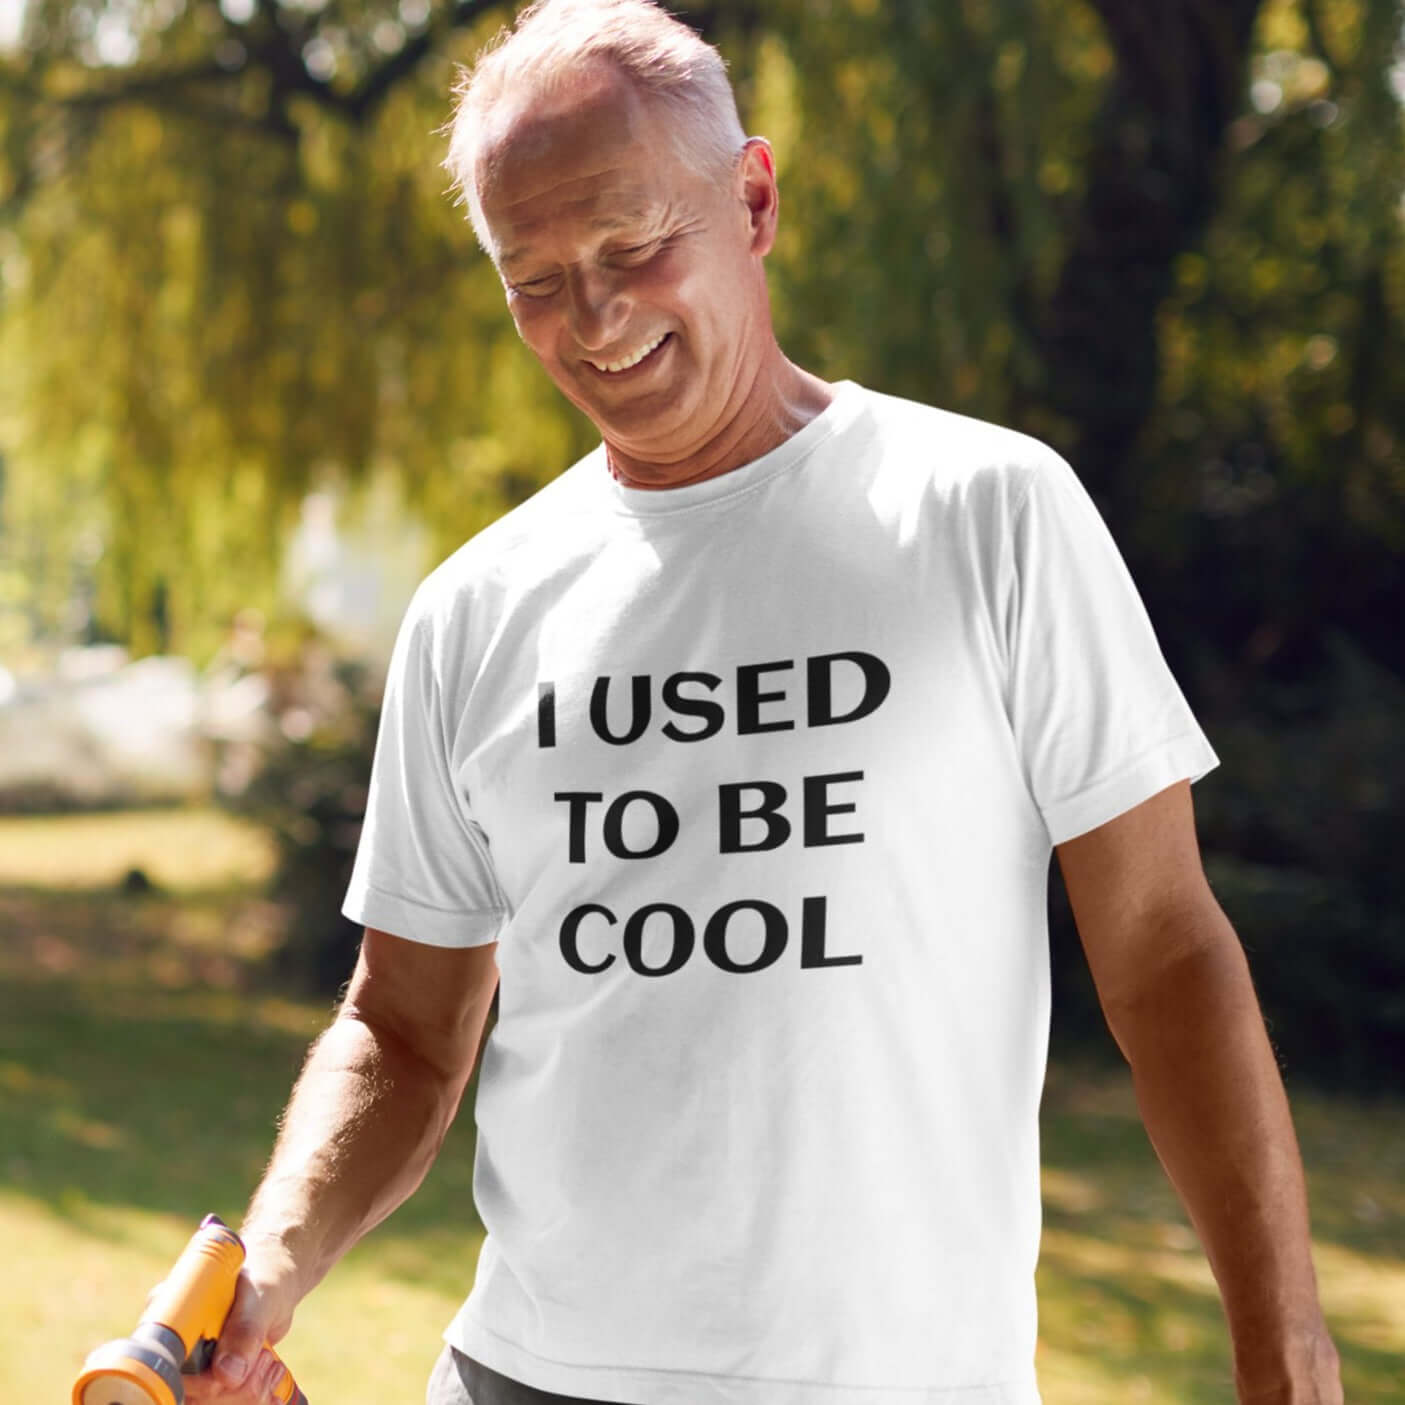 Older man watering his lawn while wearing a white t-shirt with the phrase I used to be cool printed on the front.